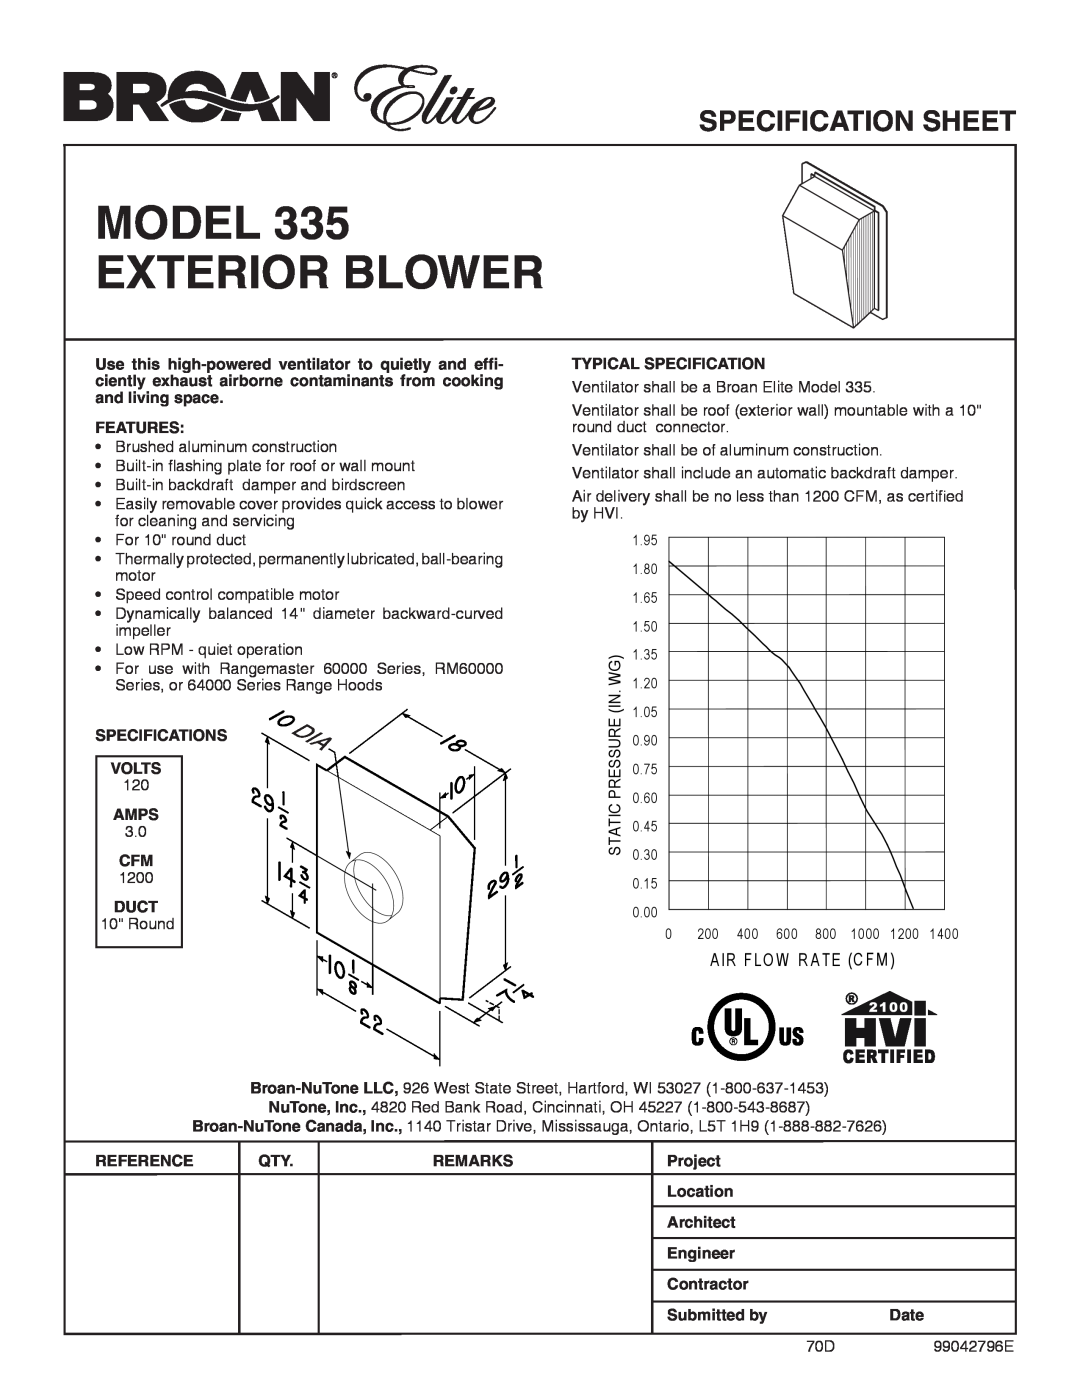 Broan 335 specifications Model Exterior Blower, Specification Sheet, Air F Lo W R Ate C F M 